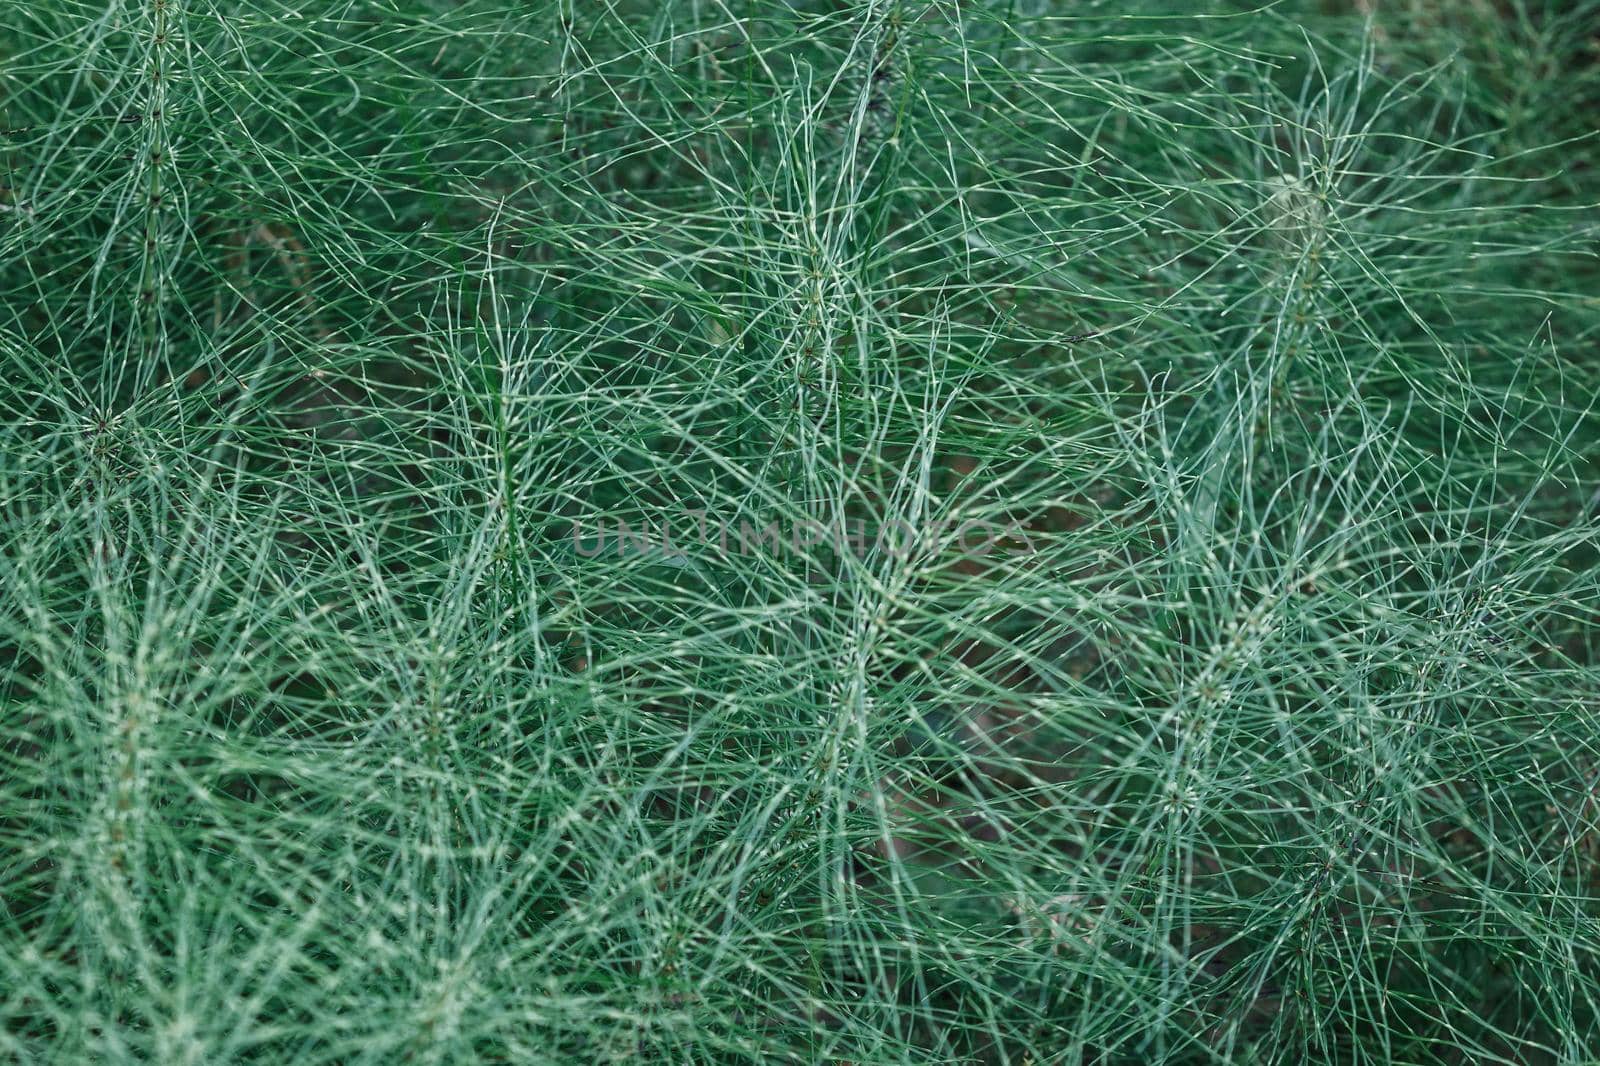 Equisetum telmateia, the great horsetail or northern giant horsetail, is a species of Equisetum with an unusual distribution.